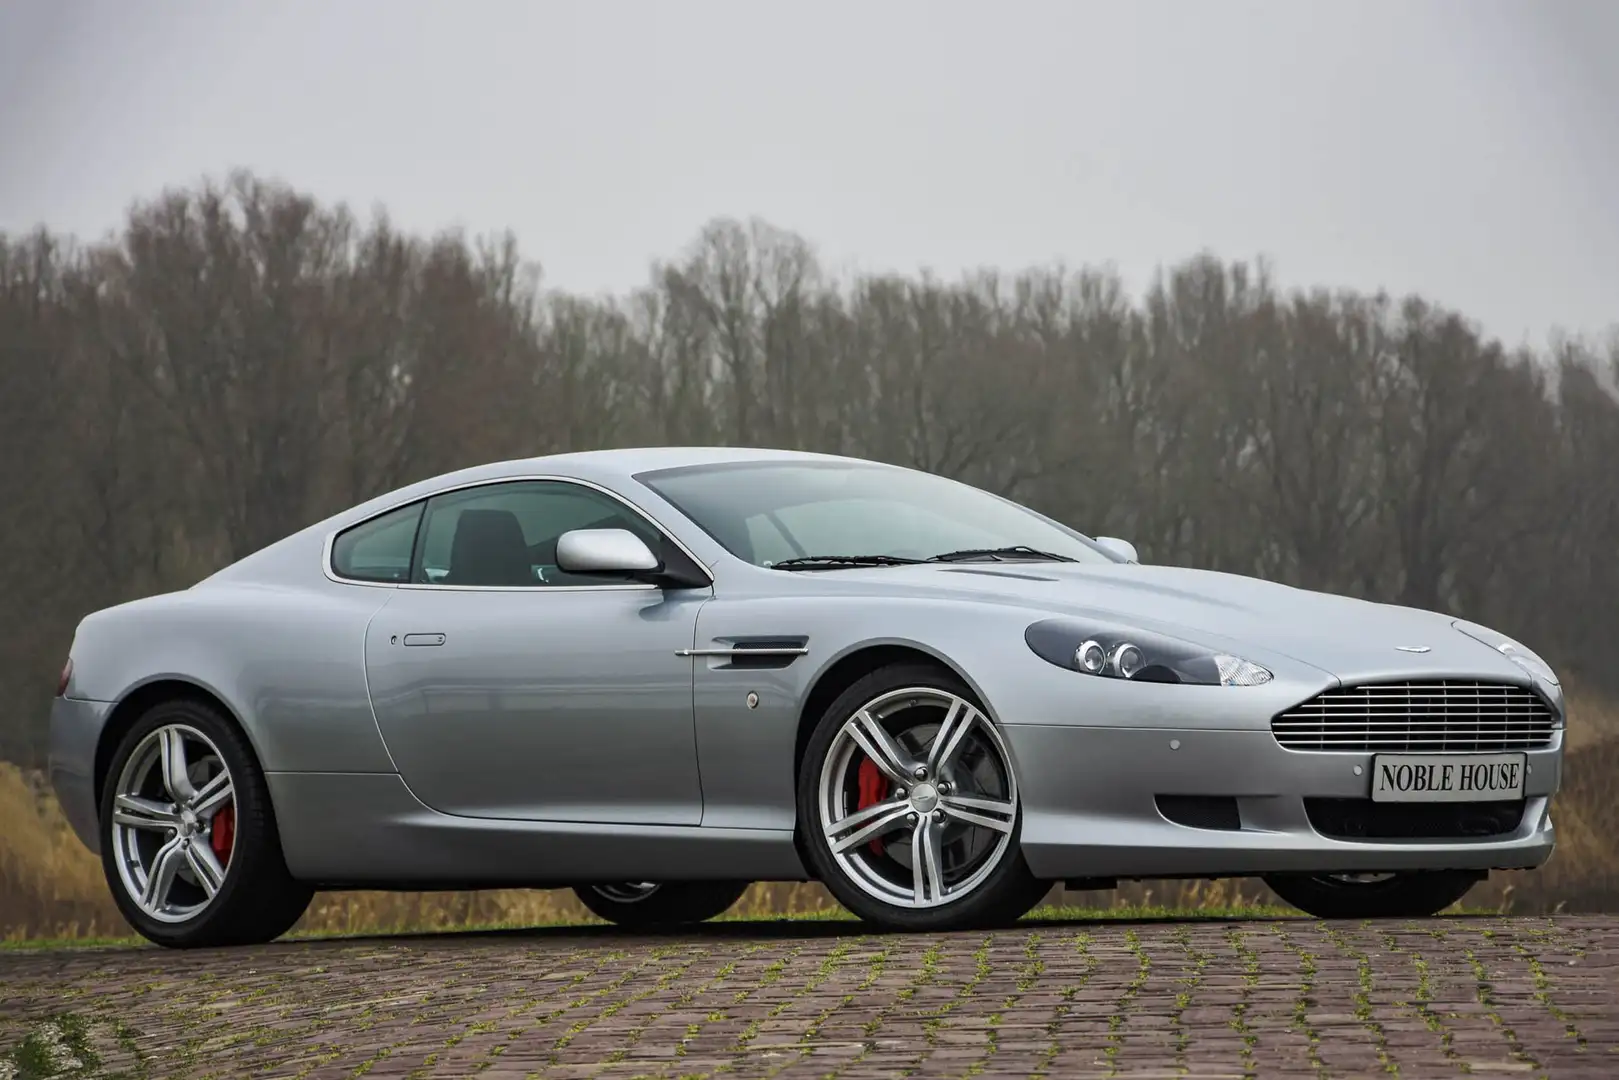 Aston Martin DB9 Coupe - only 1 owner from new! Argento - 2